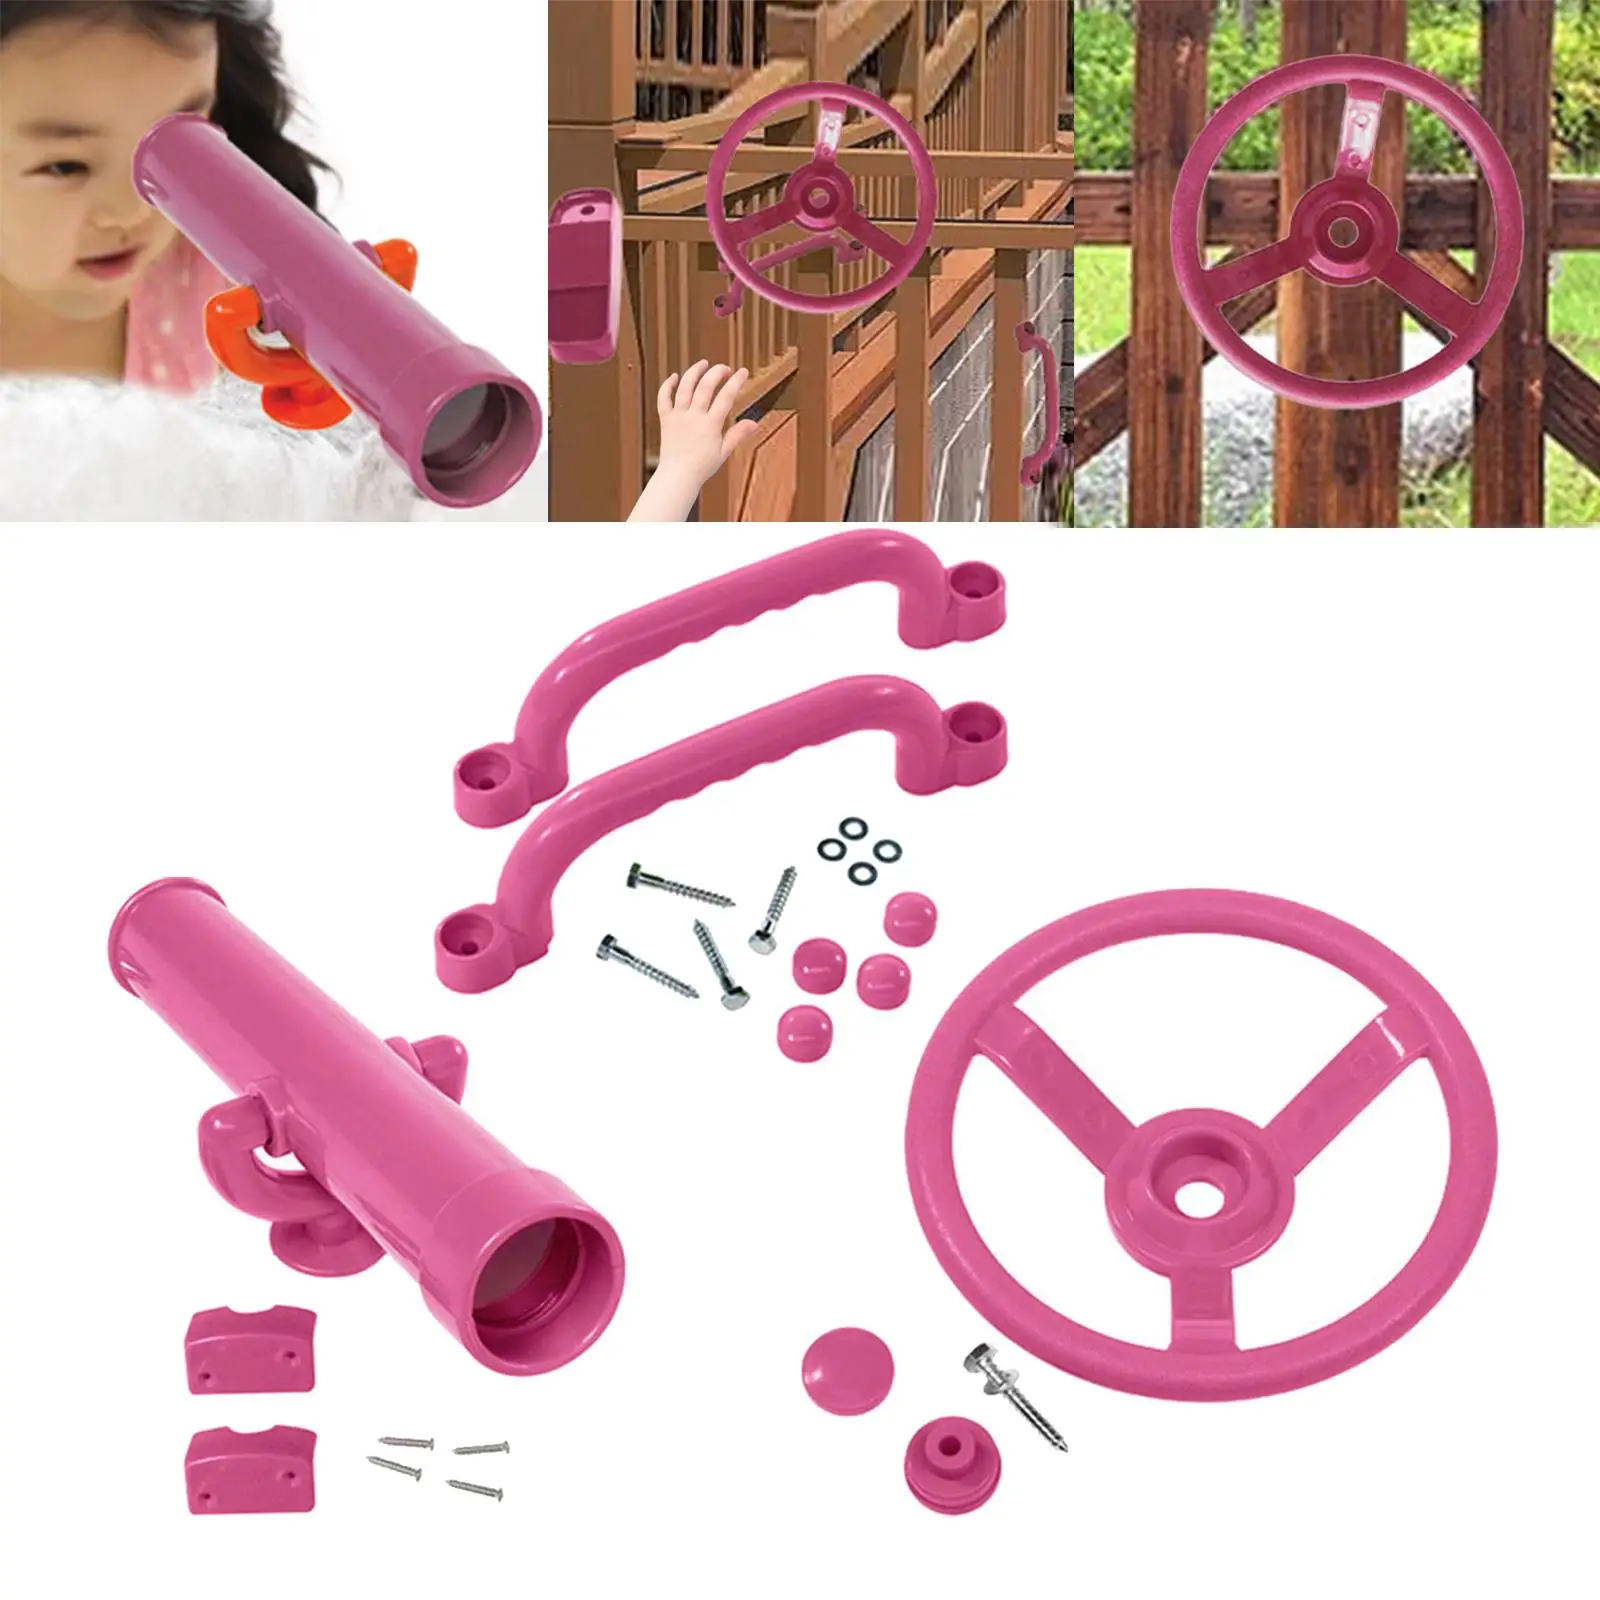 Playground Accessories Pirate Telescope Steering Wheel Handle Bars Pink Set Valentines Day Gifts for Kids for Playhouse Parts